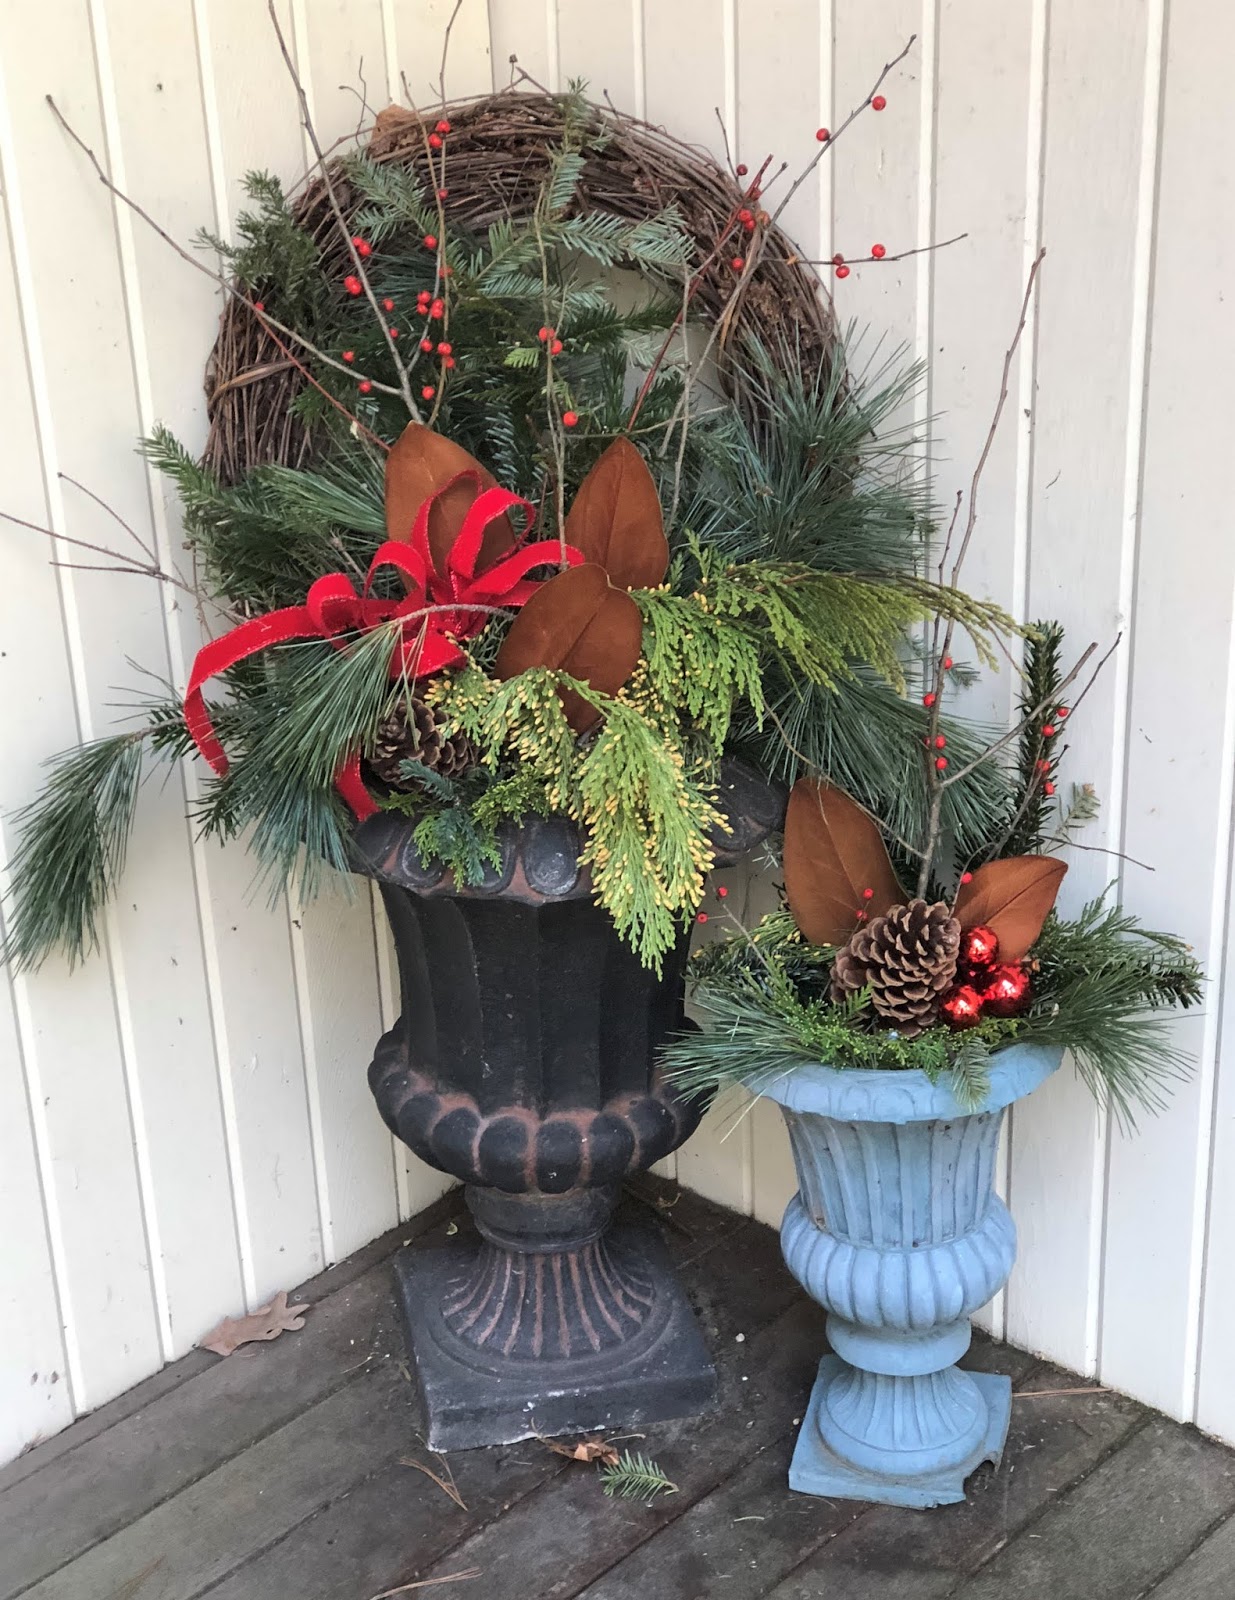 DesignsandEvents: Decorating With Evergreens for Christmas